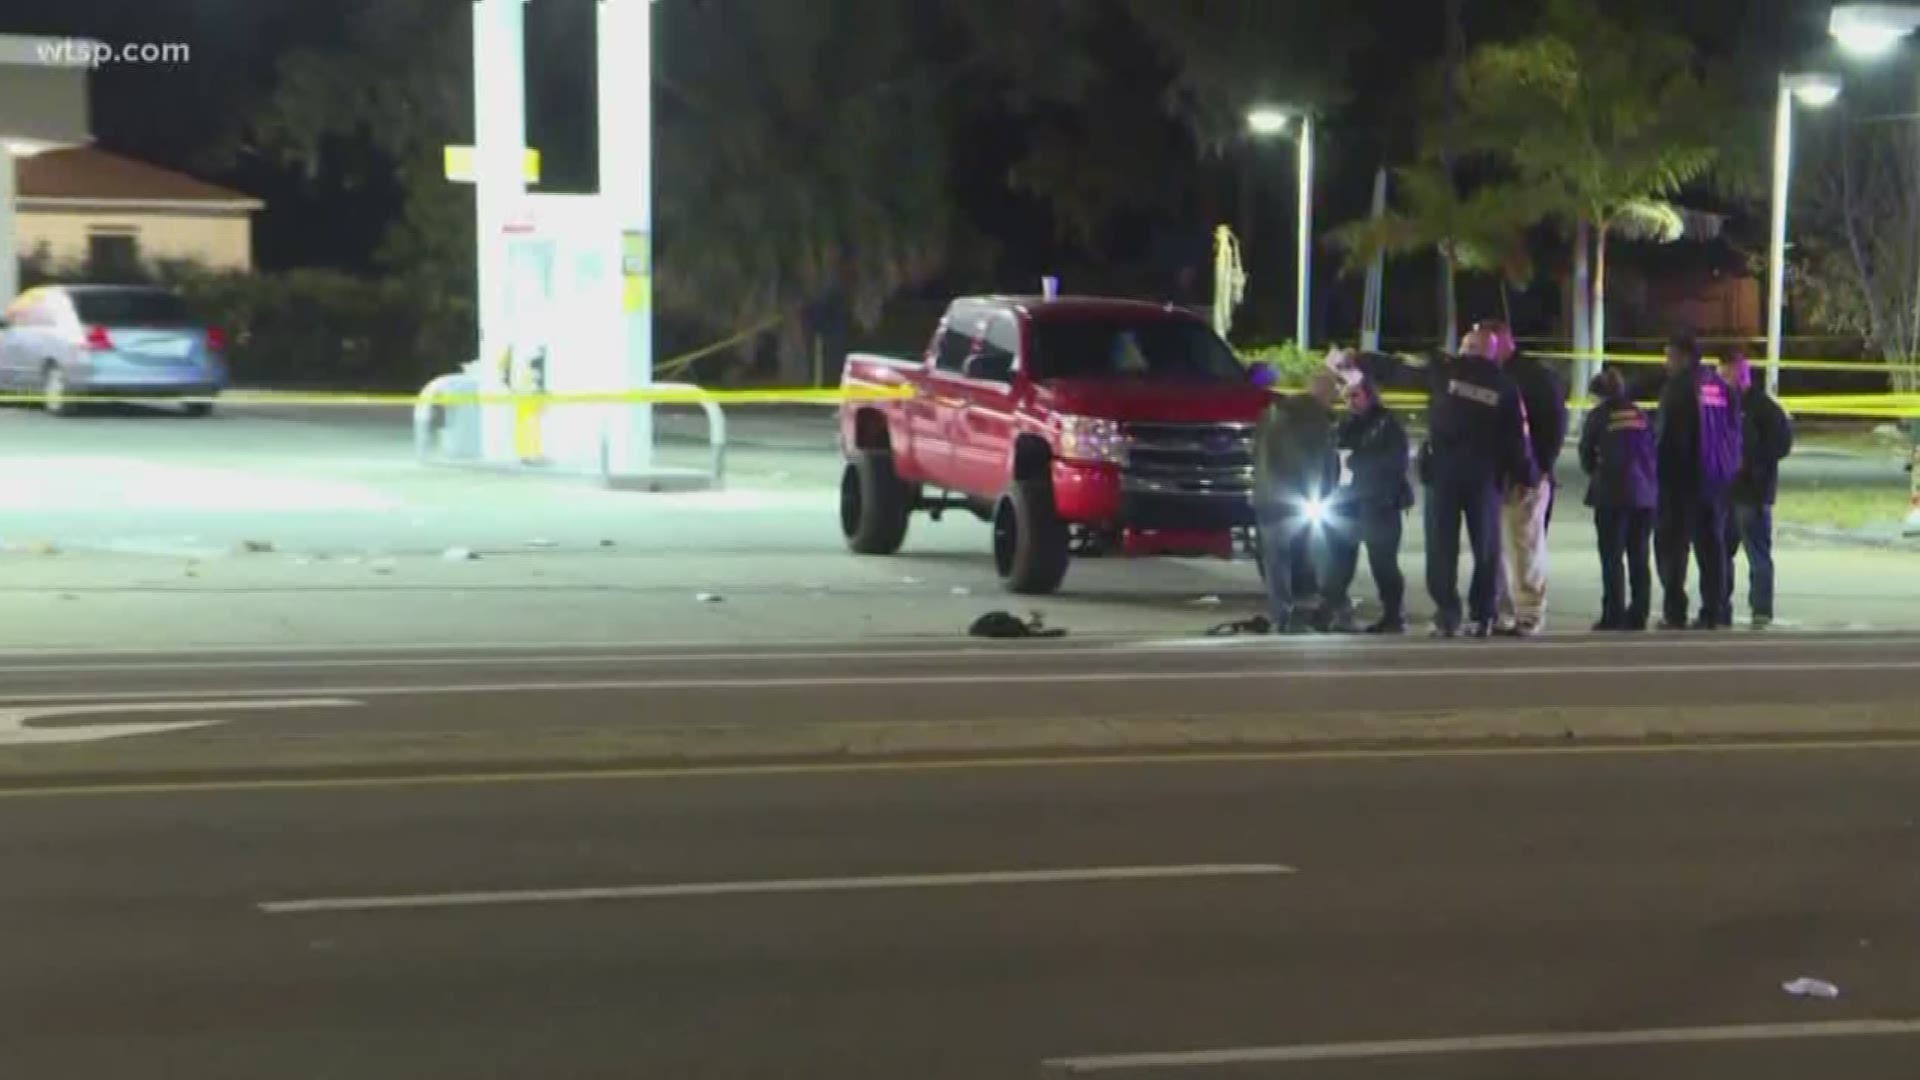 Police responding to a "chaotic" scene found two people shot at an intersection southwest of downtown St. Petersburg.